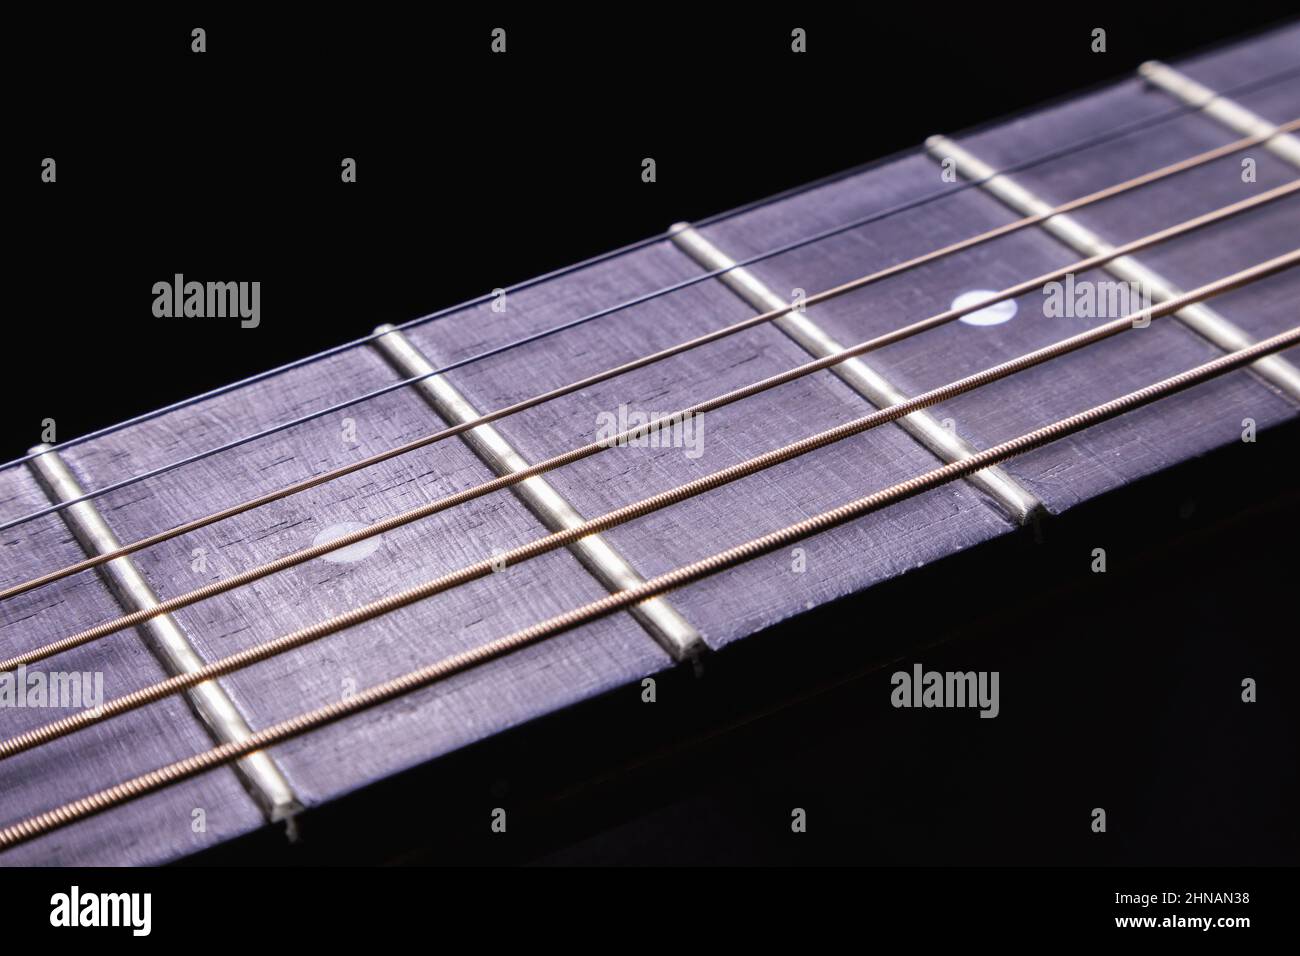 Details of an acoustic guitar neck and fretboard. Stock Photo